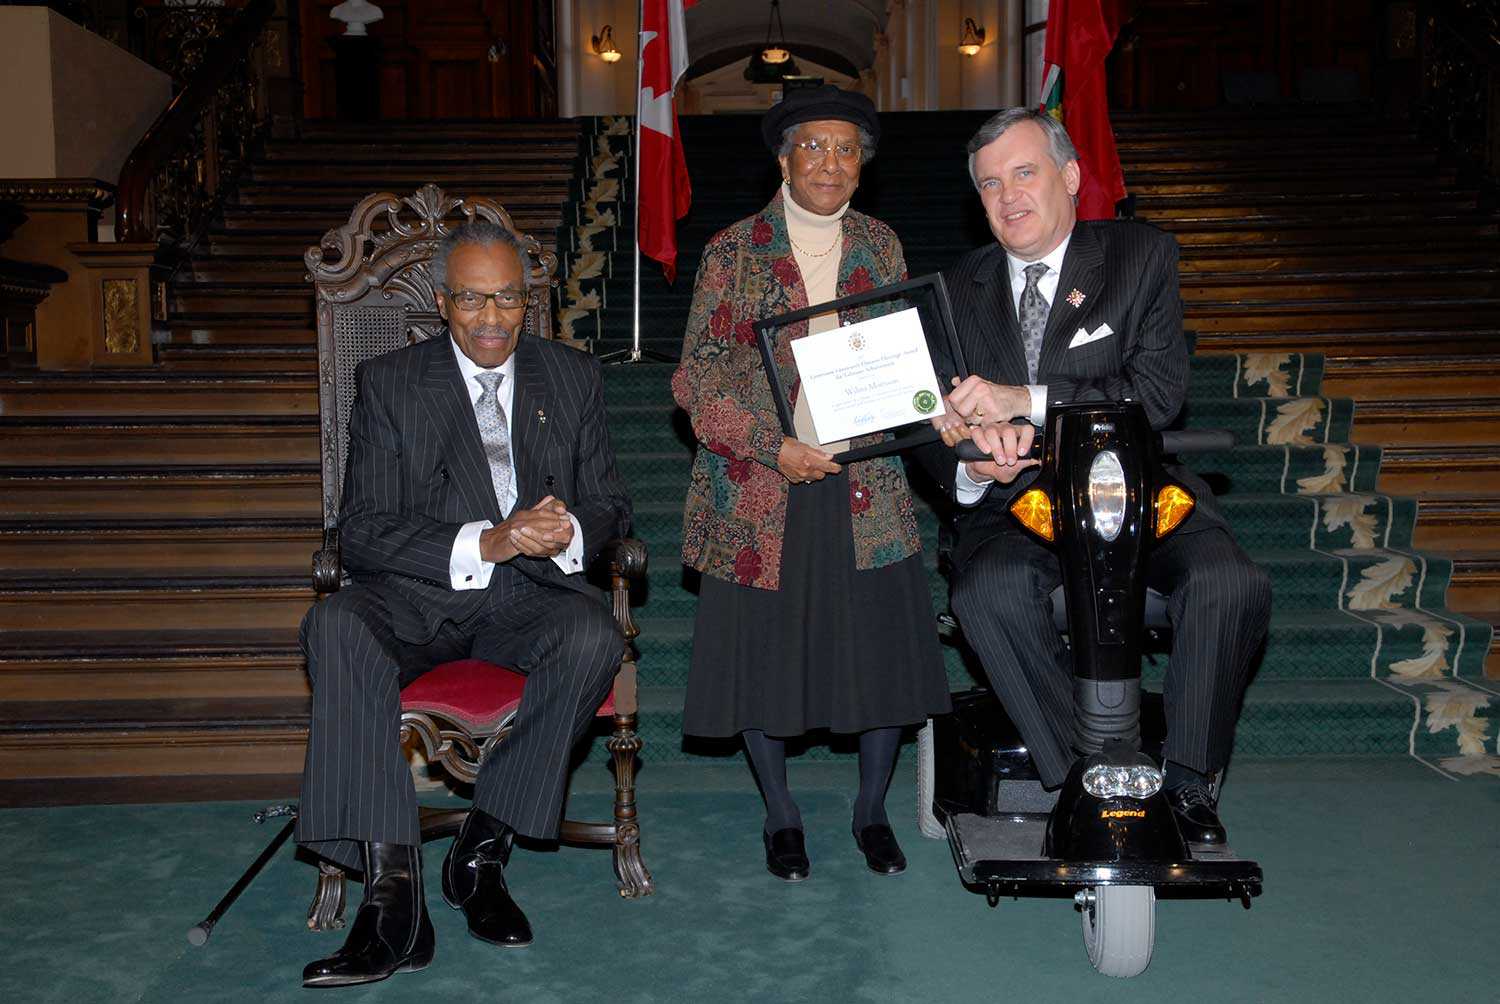 Wilma Morrison received a Lieutenant Governor’s Ontario Heritage Award for Lifetime Achievement in 2007 from the Ontario Heritage Trust, presented by The Honourable Lincoln M. Alexander (left) and The Honourable David C. Onley, Lieutenant Governor of Ontario.